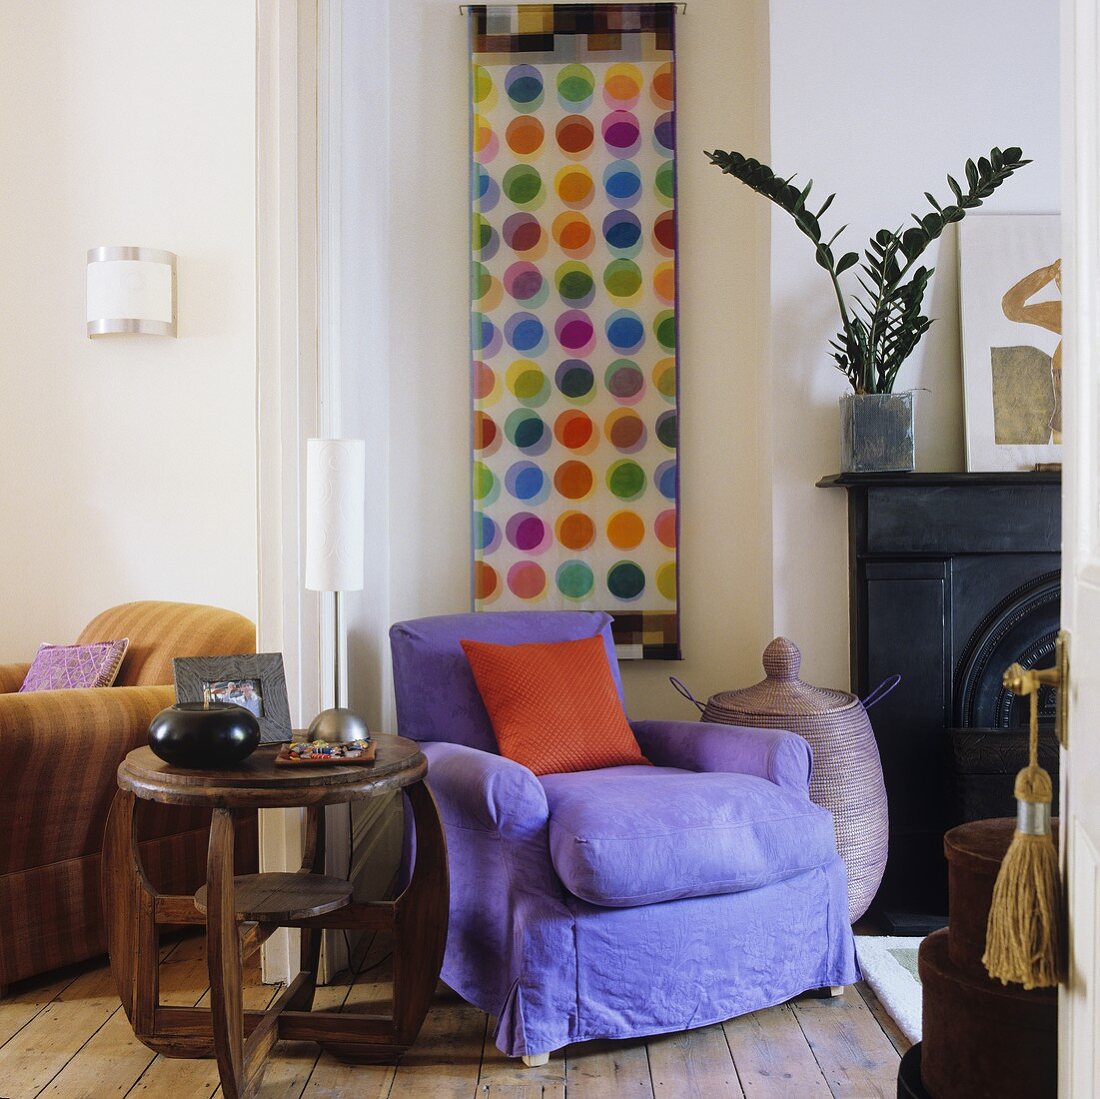 A wooden side table and a purple upholstered armchair next to a fireplace